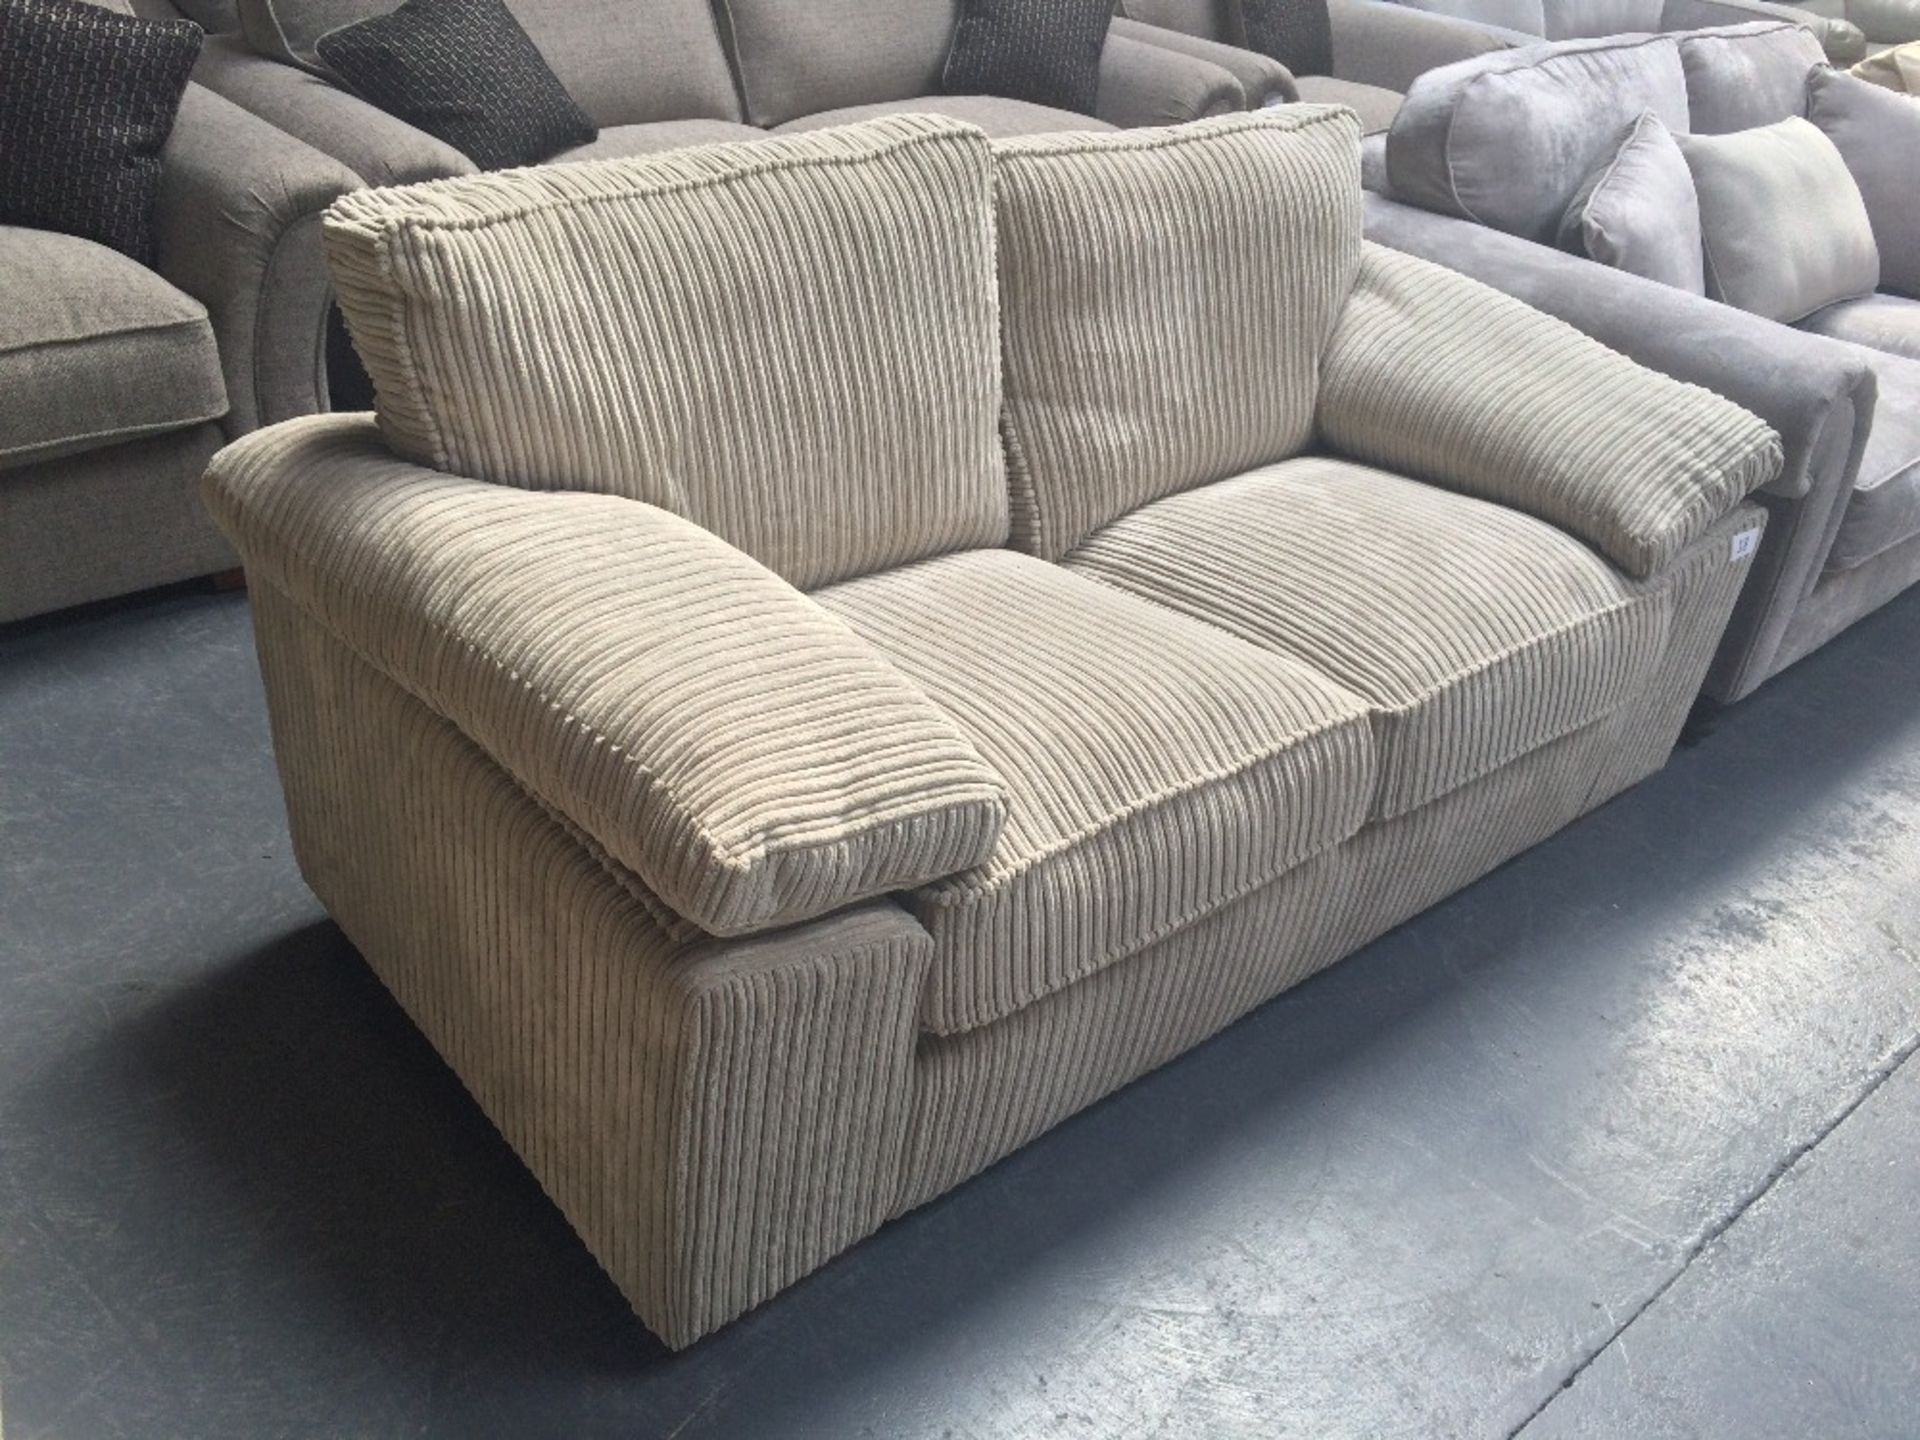 Beige Upholstered Two Seater Sofa - Image 3 of 3